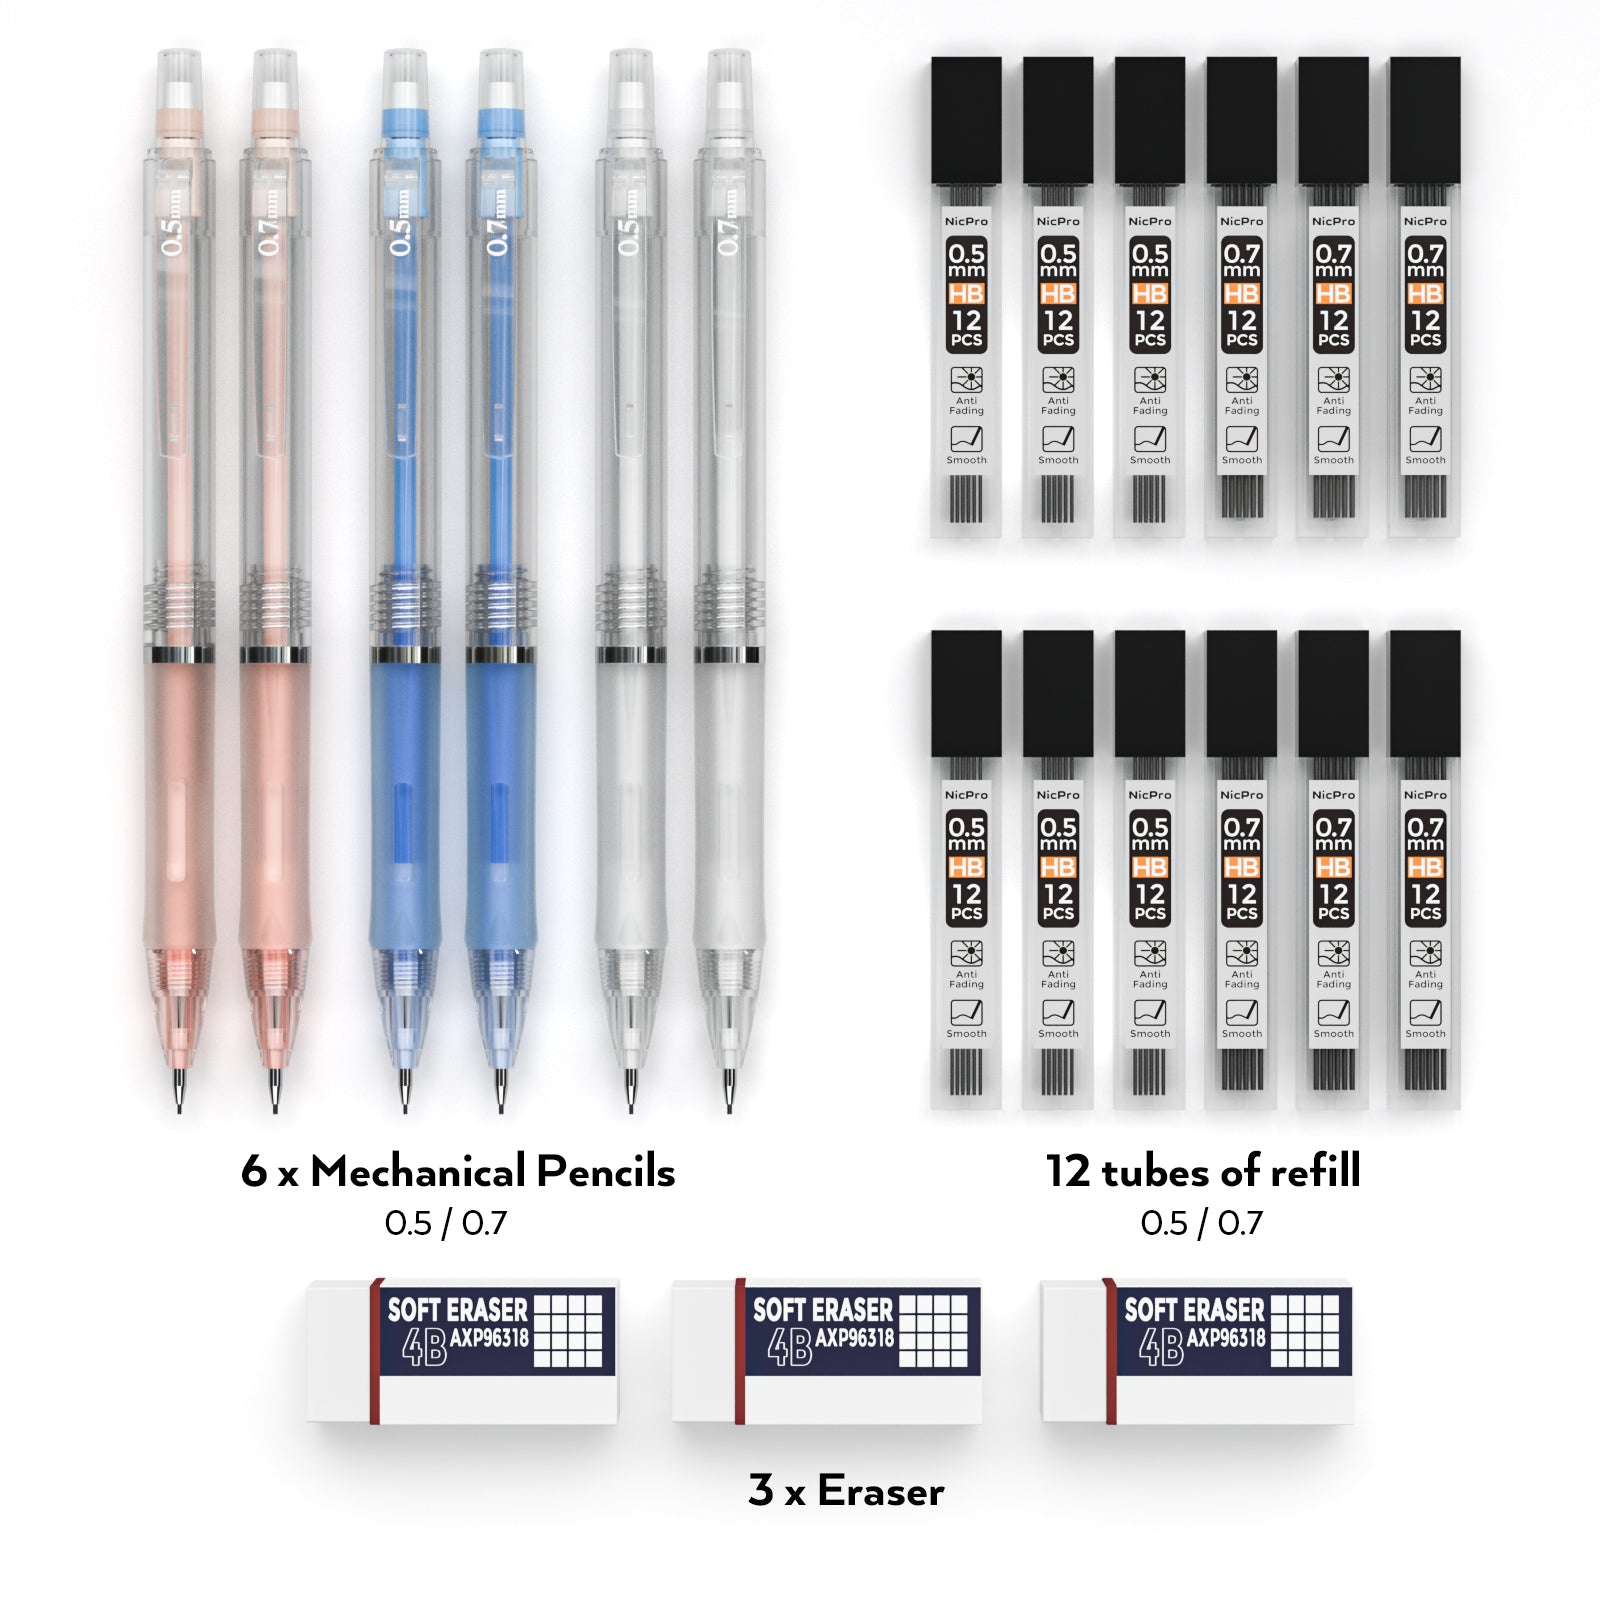 Nicpro 6 PCS Mechanical Pencil 0.5 & 0.7 mm for School, with HB Lead Refills, Erasers For Student Writing, Drawing, Sketching, Blue & Pink & White Colors - Come with Case